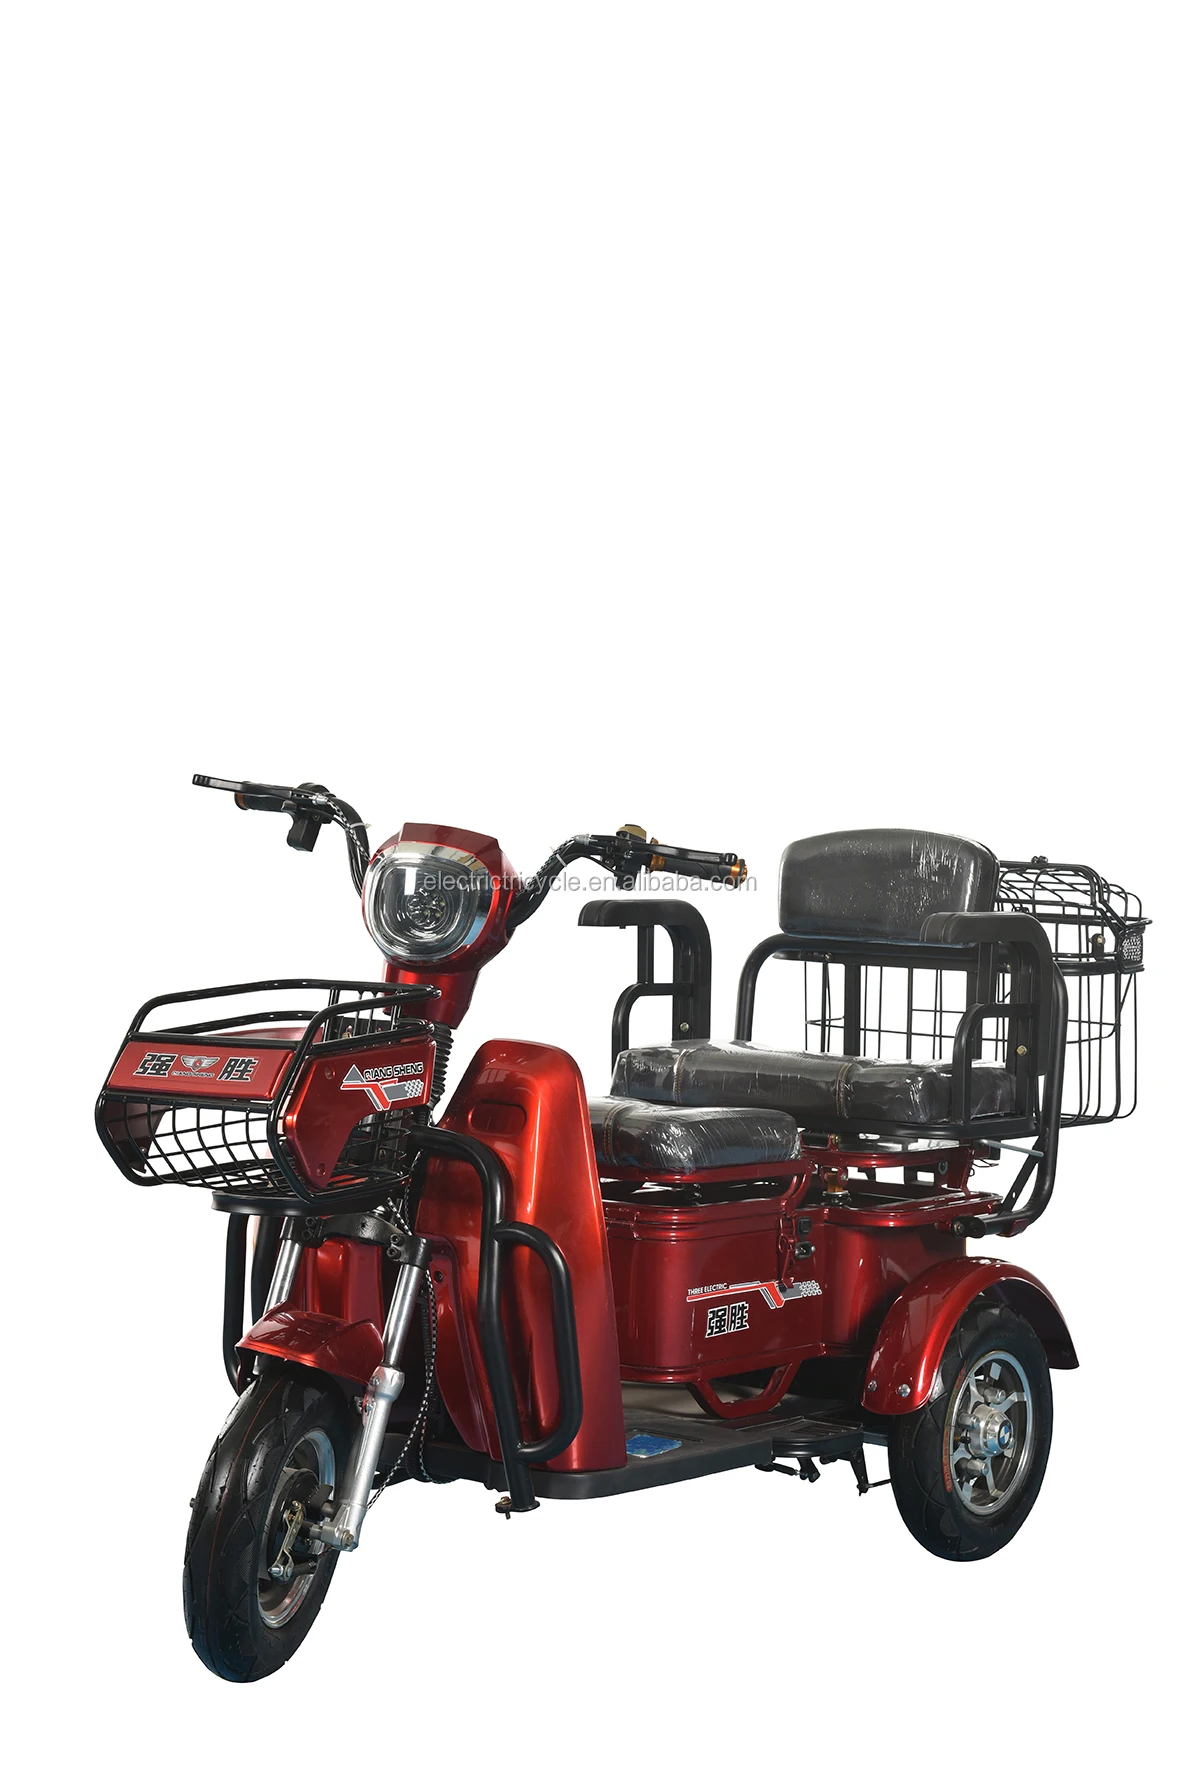 Disabled 3 Wheel Scooter Three Wheel Motorcycle Taxi For Sale In Philippines Buy 3 Wheel Scooter Three Wheel Motorcycle Scooter Taxi Product On Alibaba Com